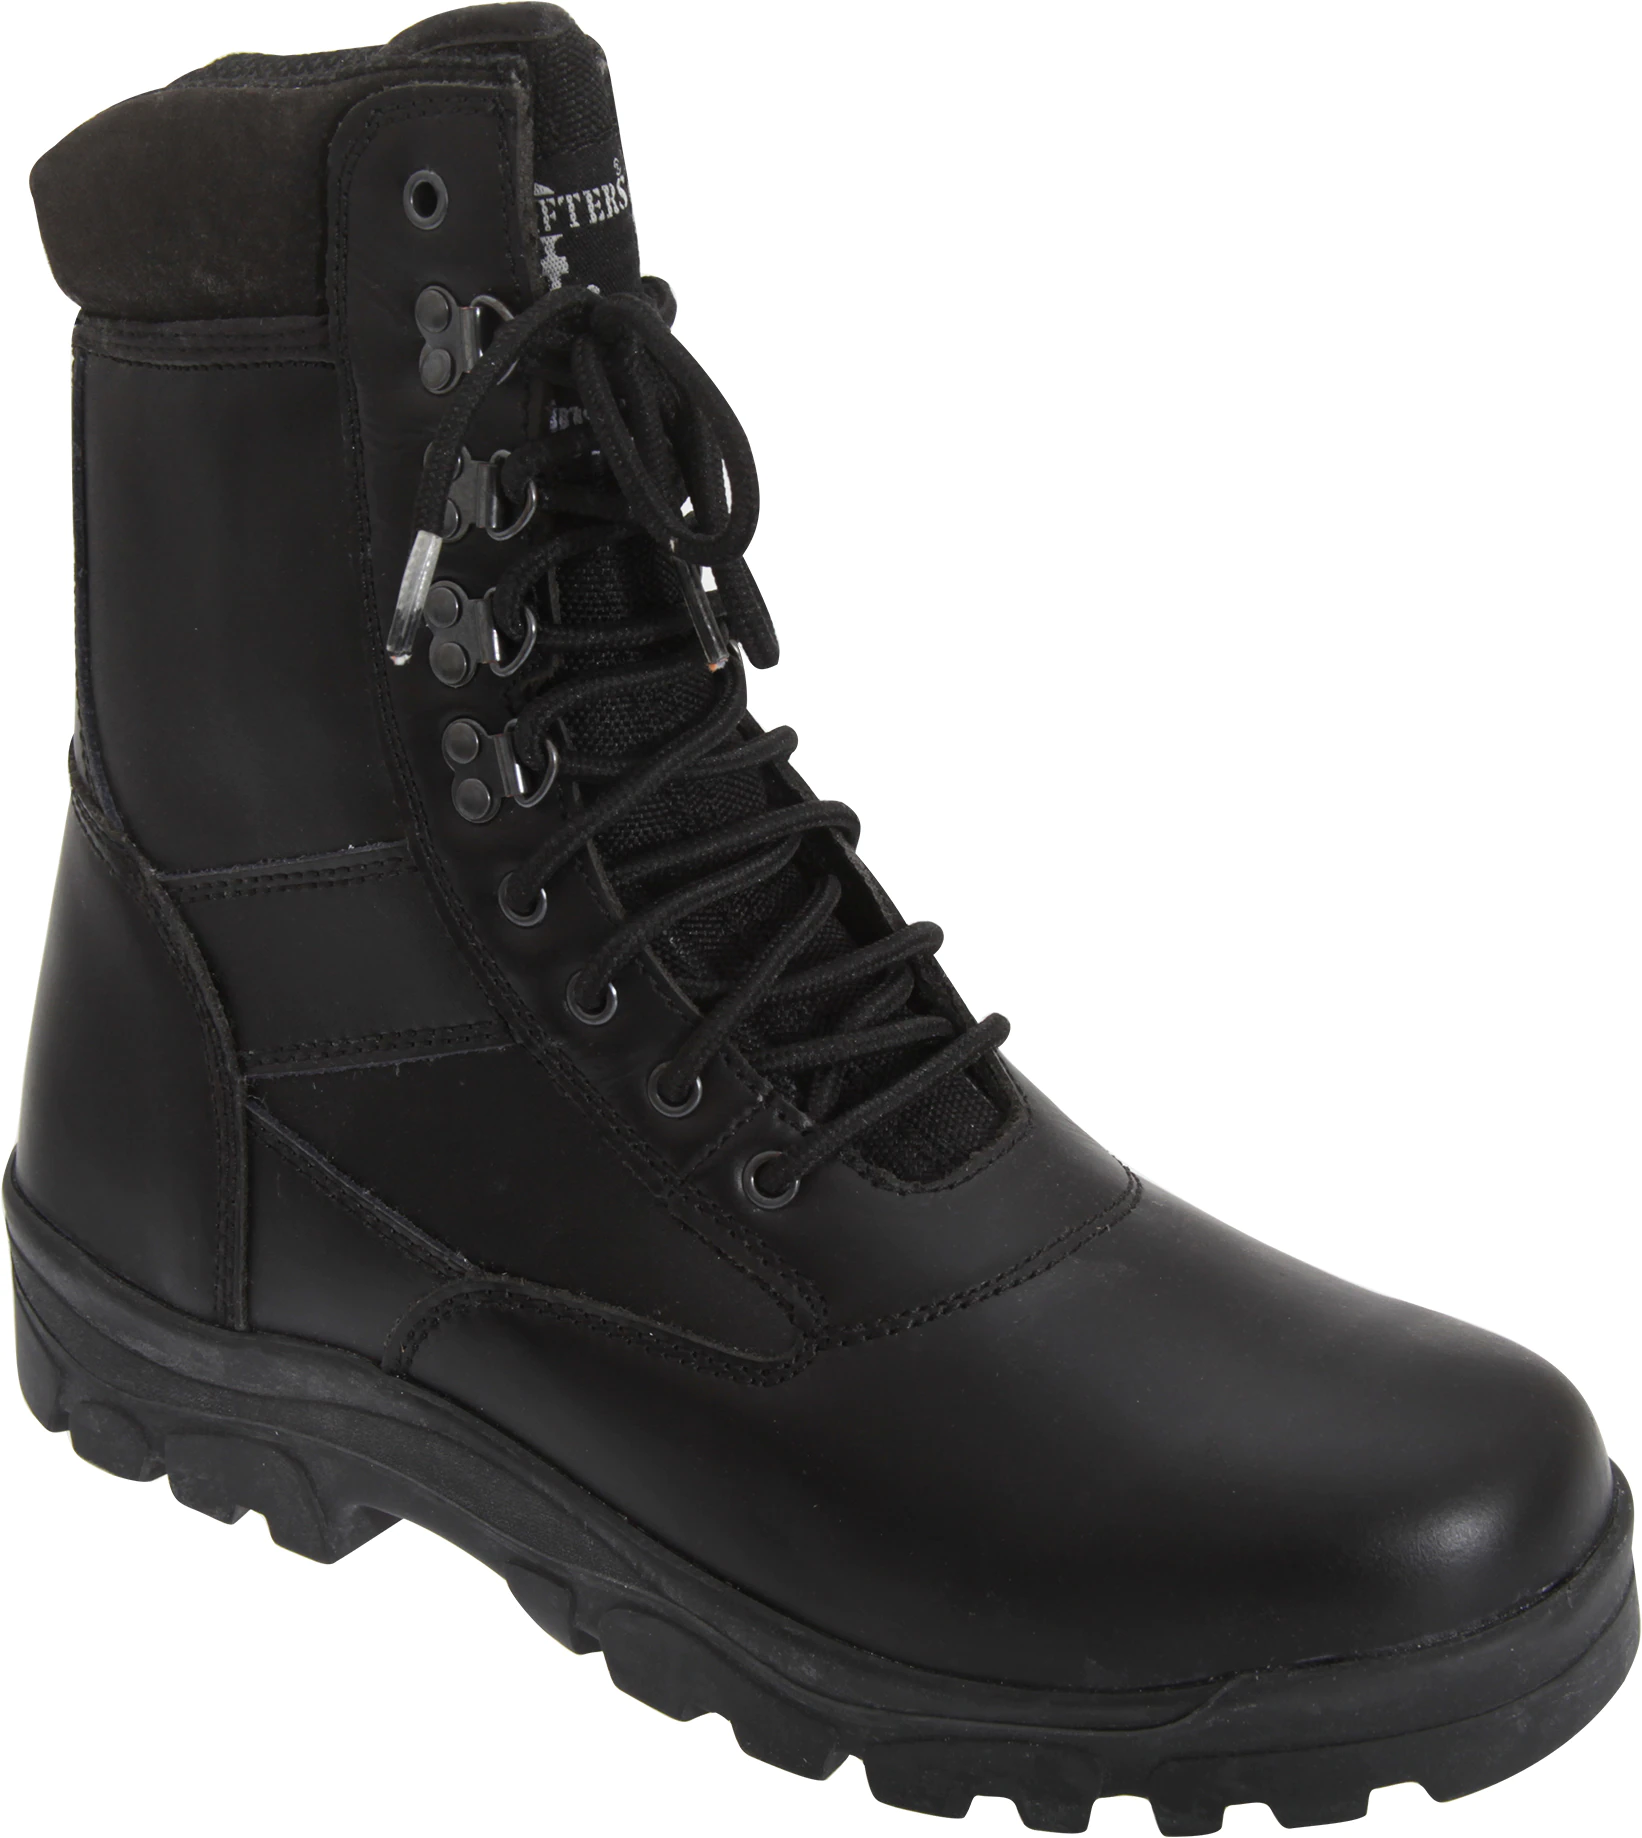 Grafters Top Gun Combat Boots With Thinsulate Inner Material